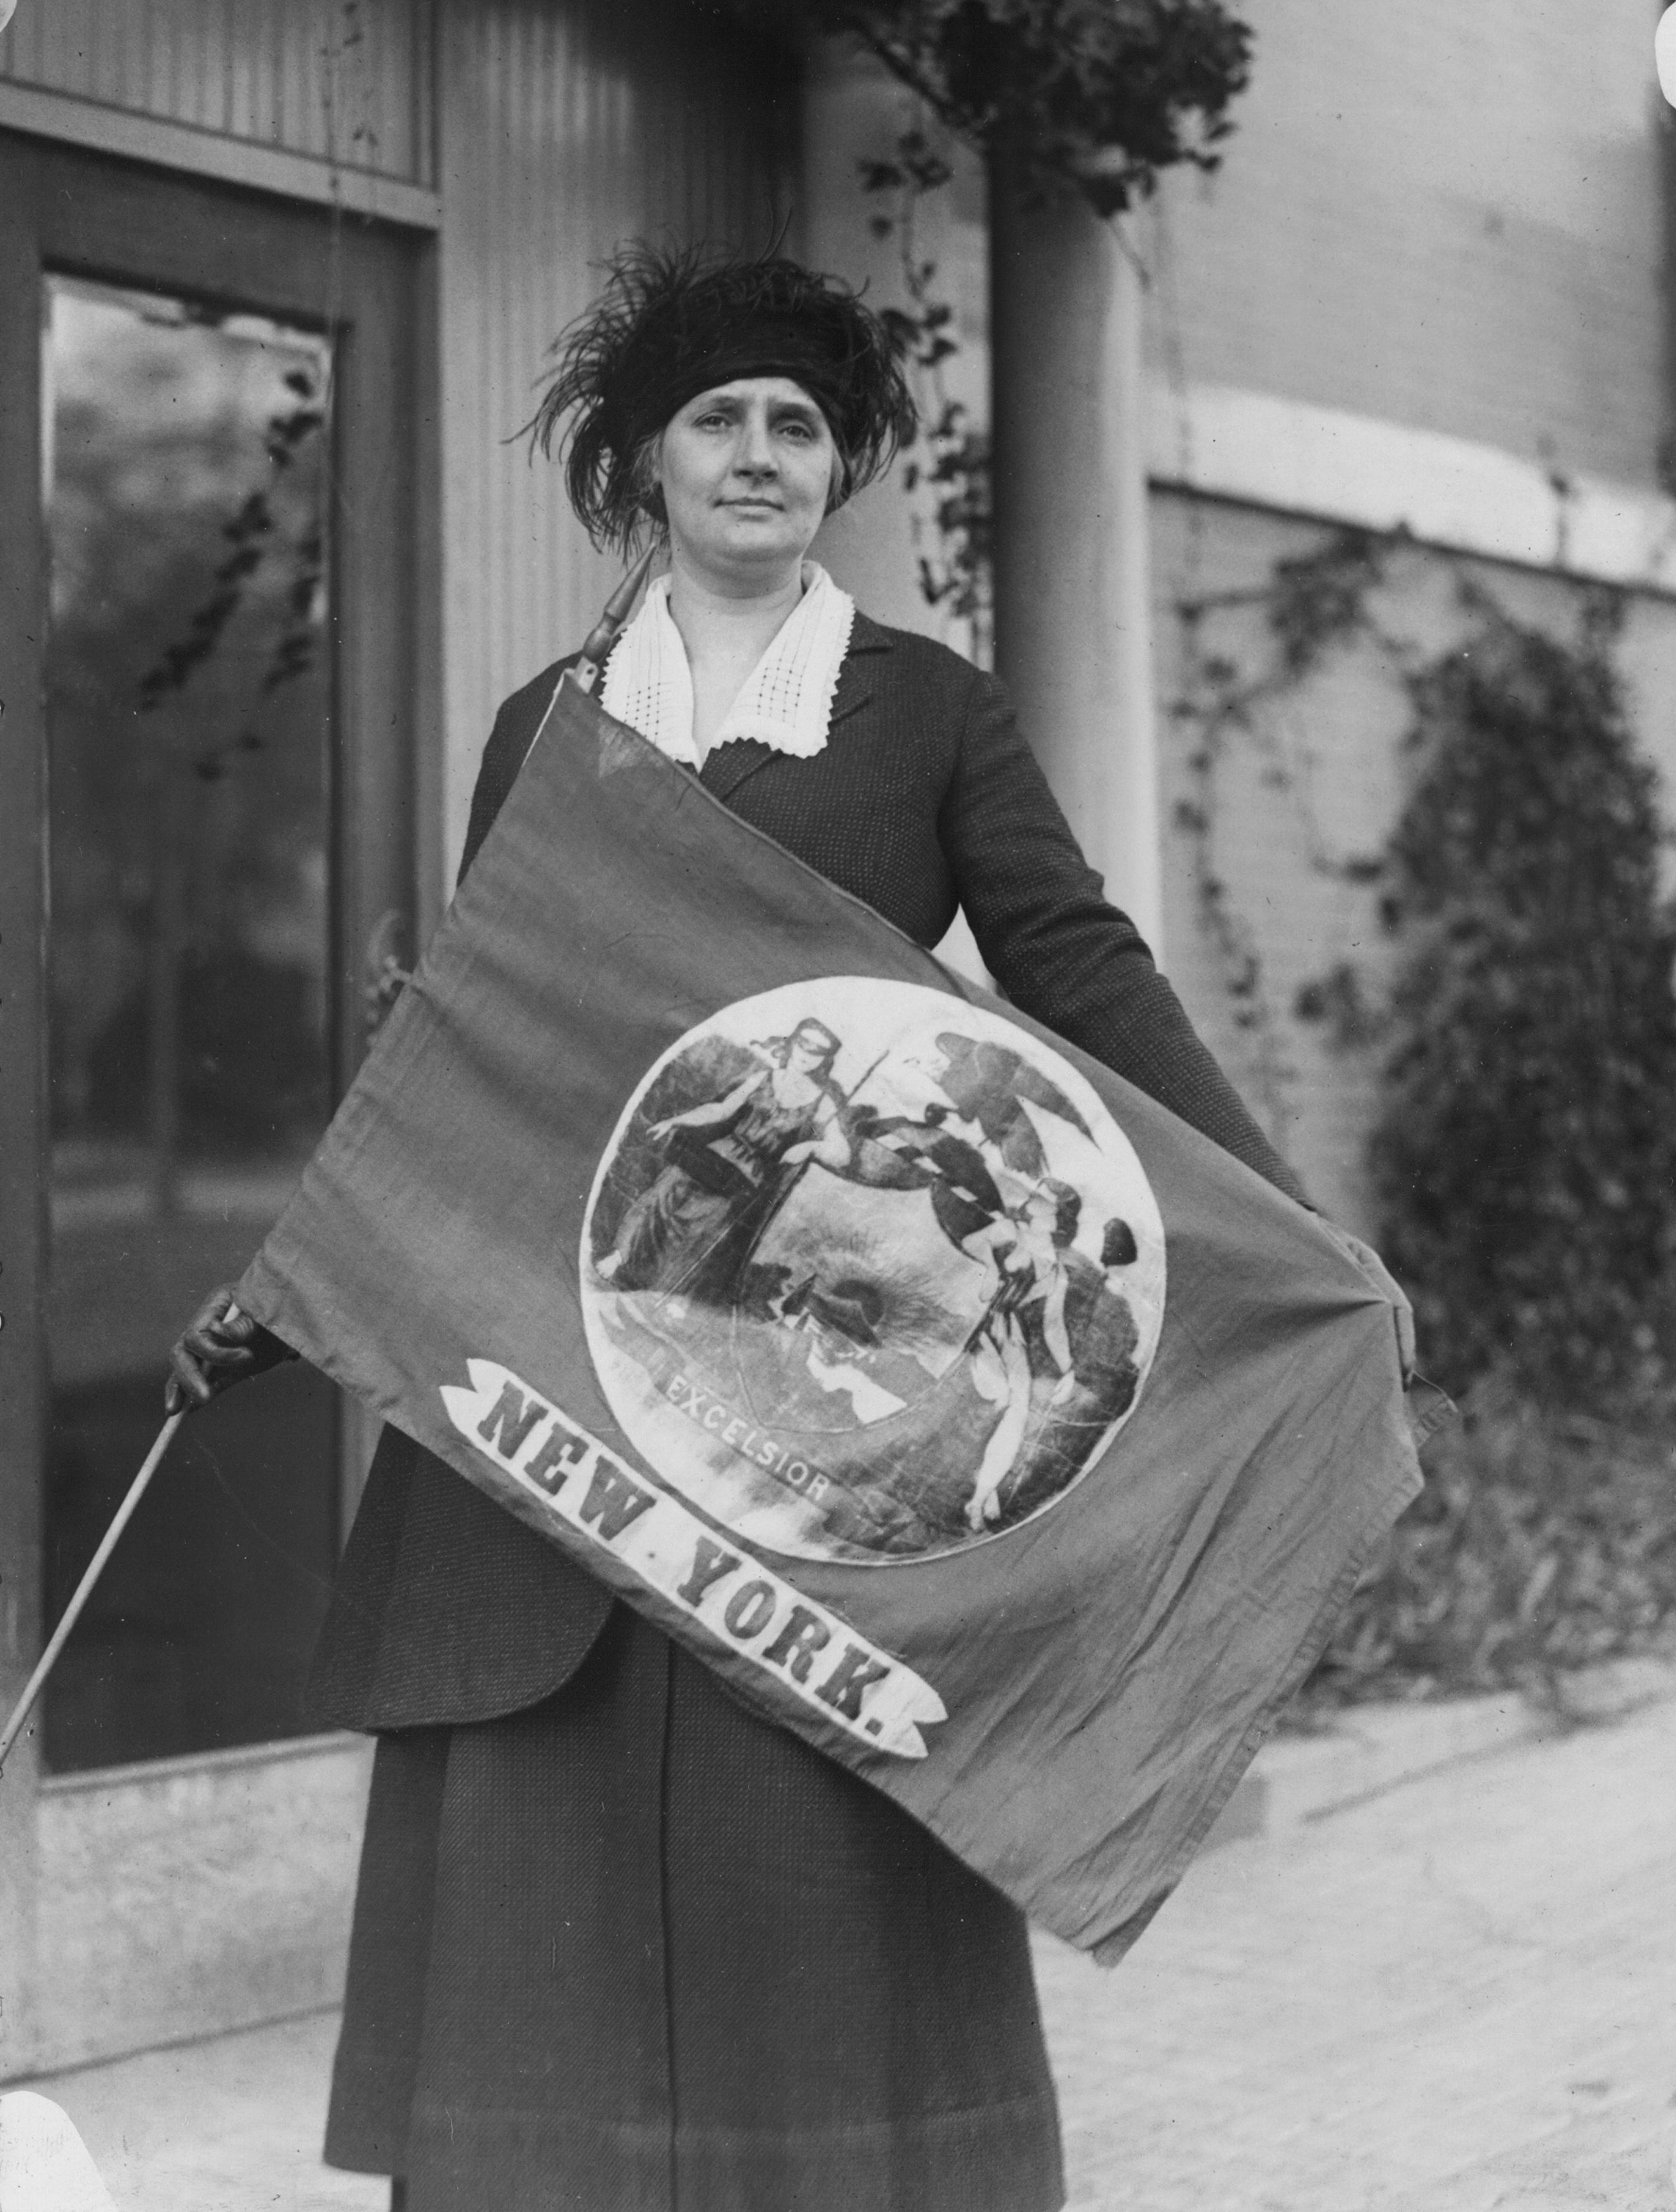 In this photo from February 1921, Ainge proudly displays the New York State flag as she arrives for the first convention of the National Woman’s Party following the amendment’s ratification. Ainge was the first of the delegates to arrive at the four-day event in Washington. Retrieved from the collection of the Library of Congress, http://hdl.loc.gov/loc.mss/mnwp.147004.